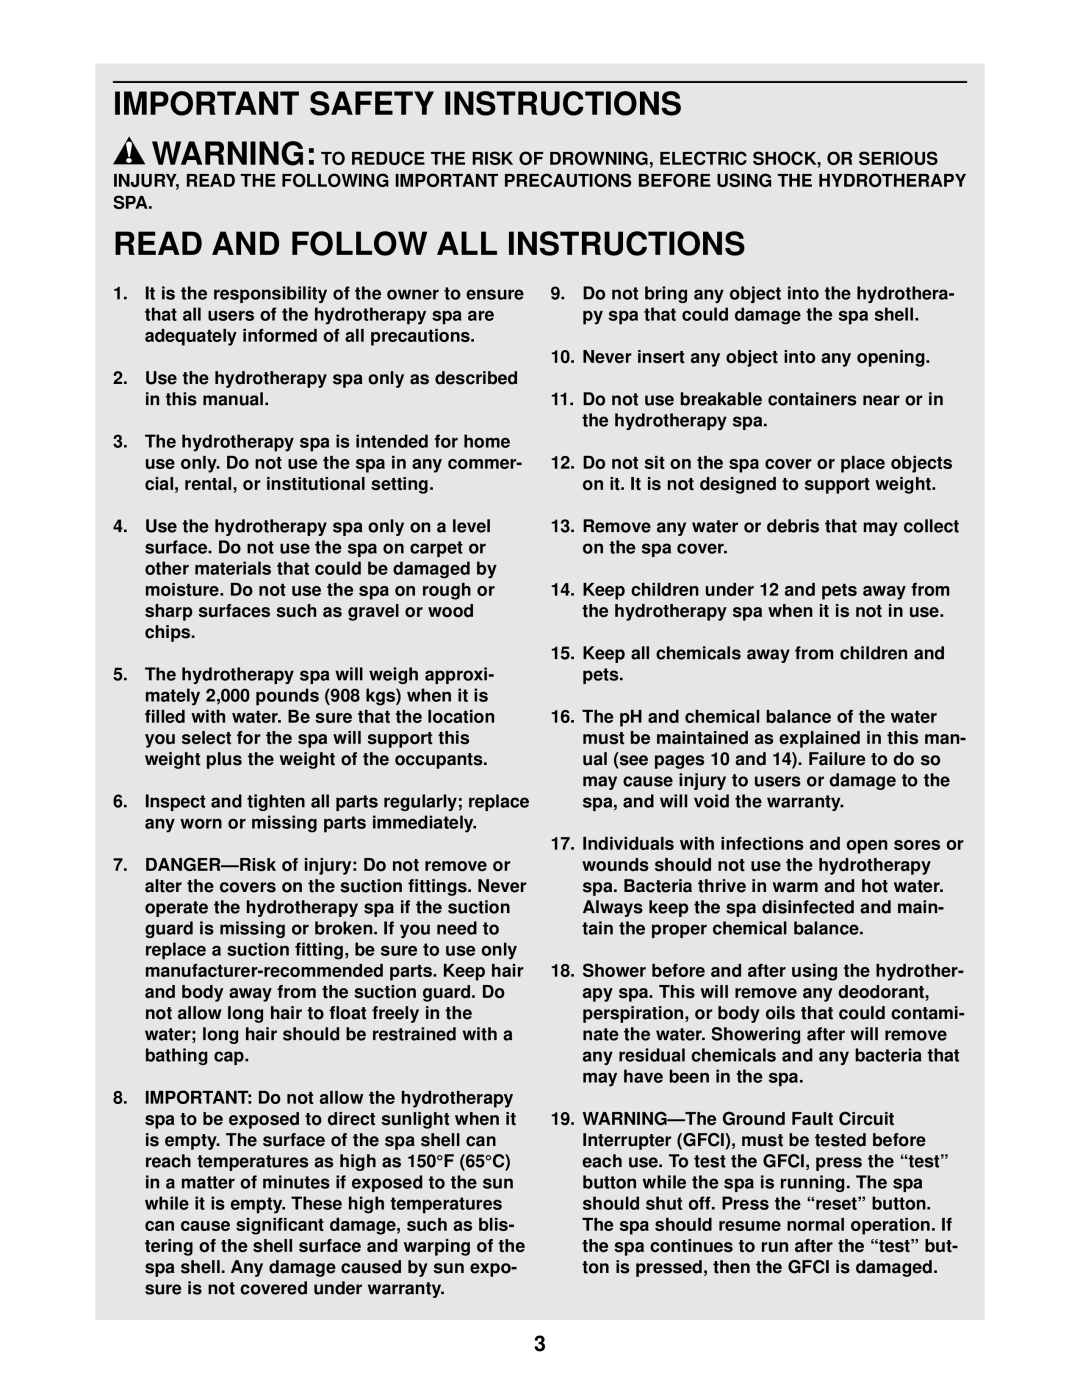 Sears 831.105021 Important Safety Instructions, Read And Follow All Instructions, in this manual, the hydrotherapy spa 